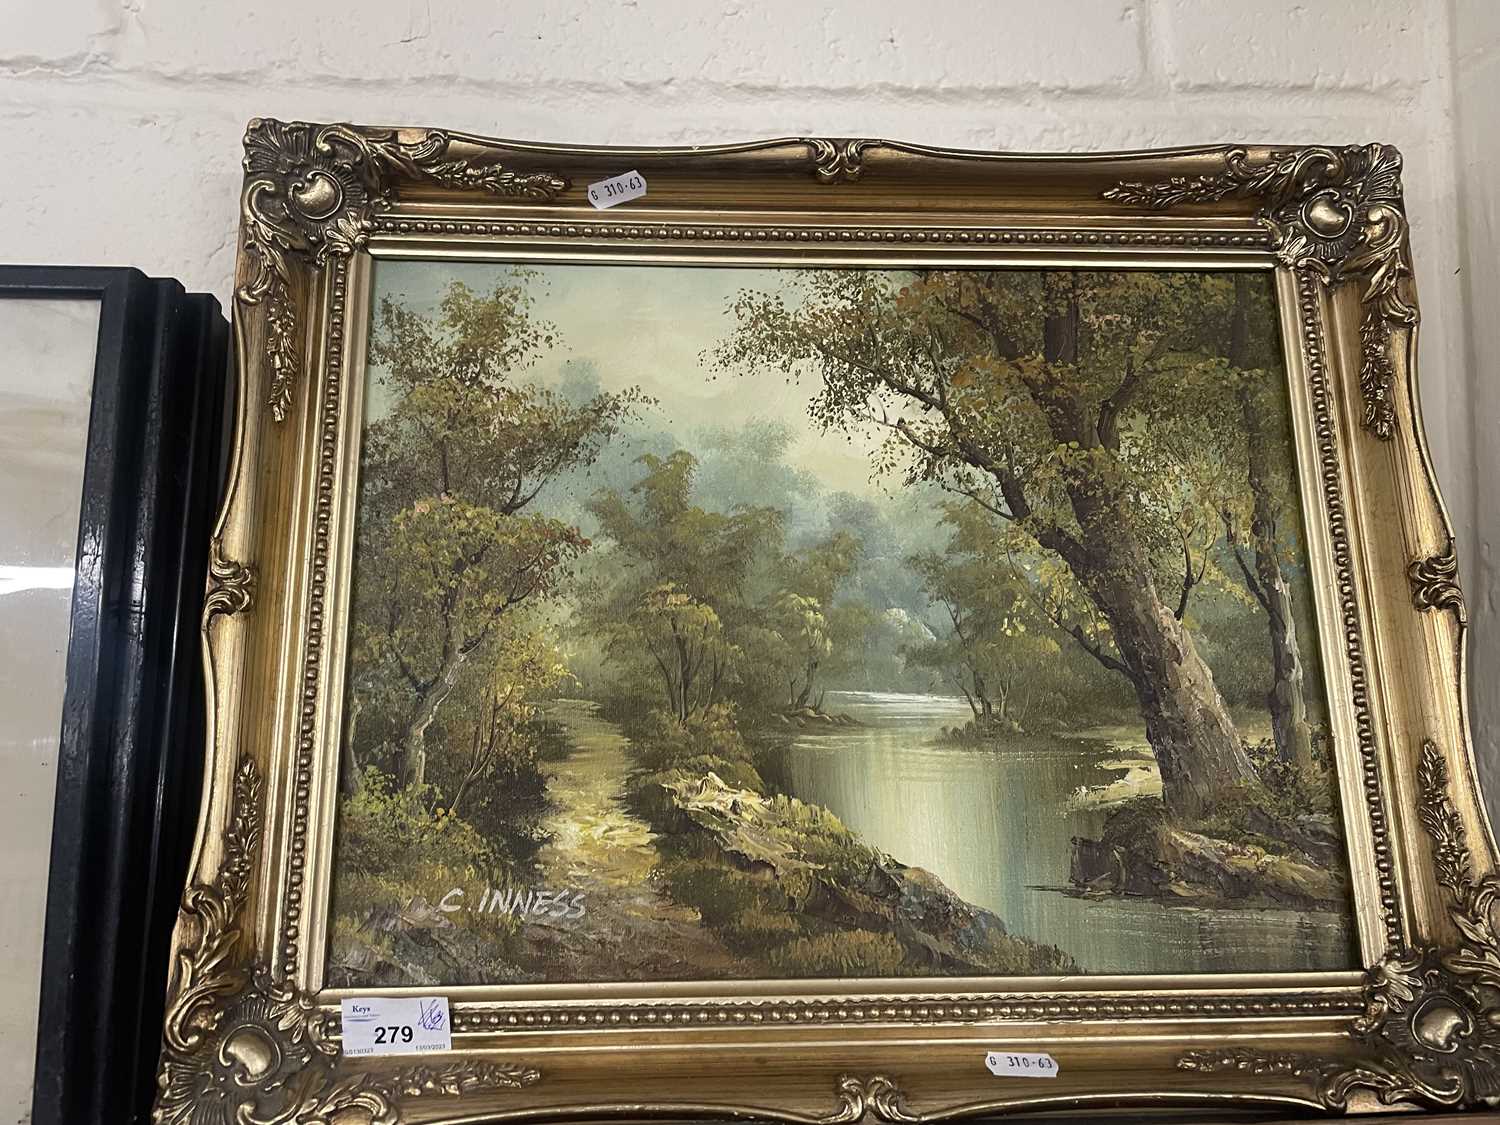 Contemporary riverside landscape by C Inness in reproduction gilt moulded frame